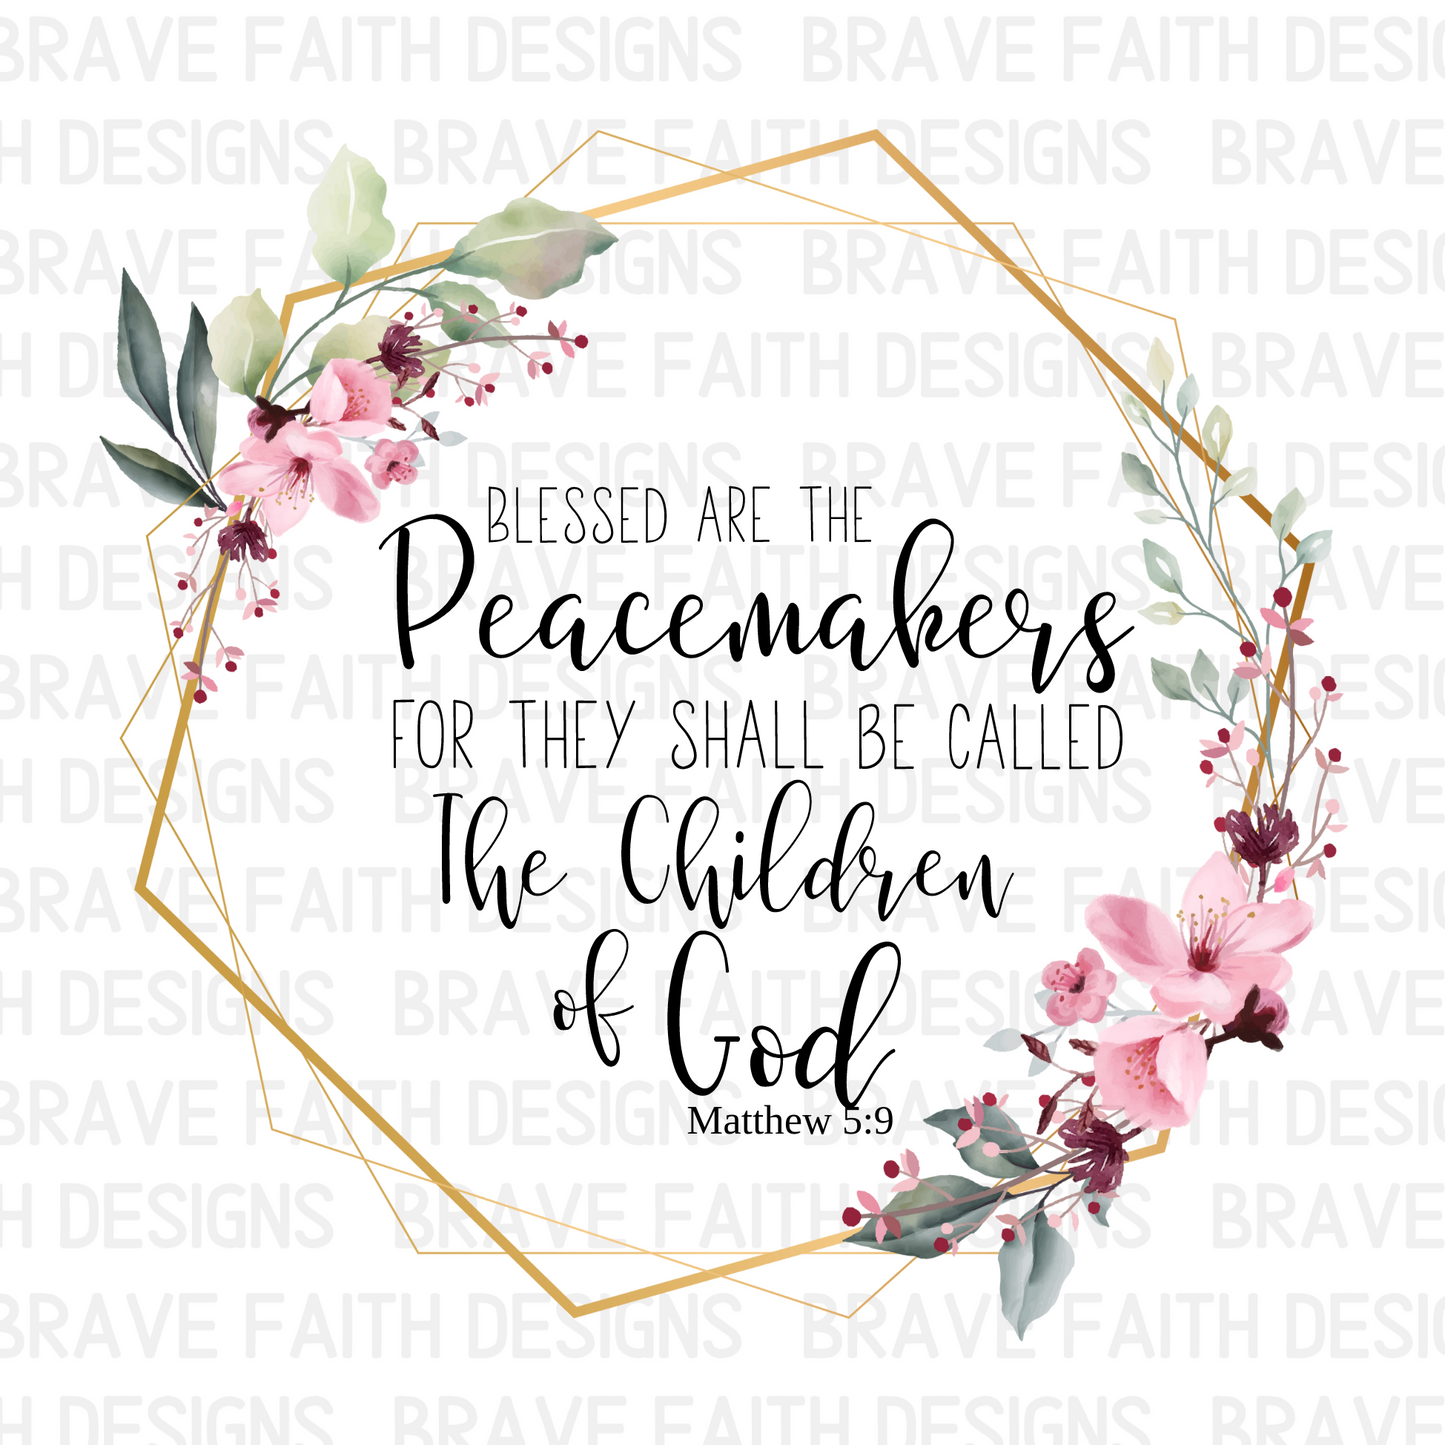 Mockup image of a print that displays a quote from Matthew 5:9 KJV that says Blessed are the peacemakers for they shall be called the Children of God. the quote is surrounded by a gold  geometric frame with pink flowers and greenery. 